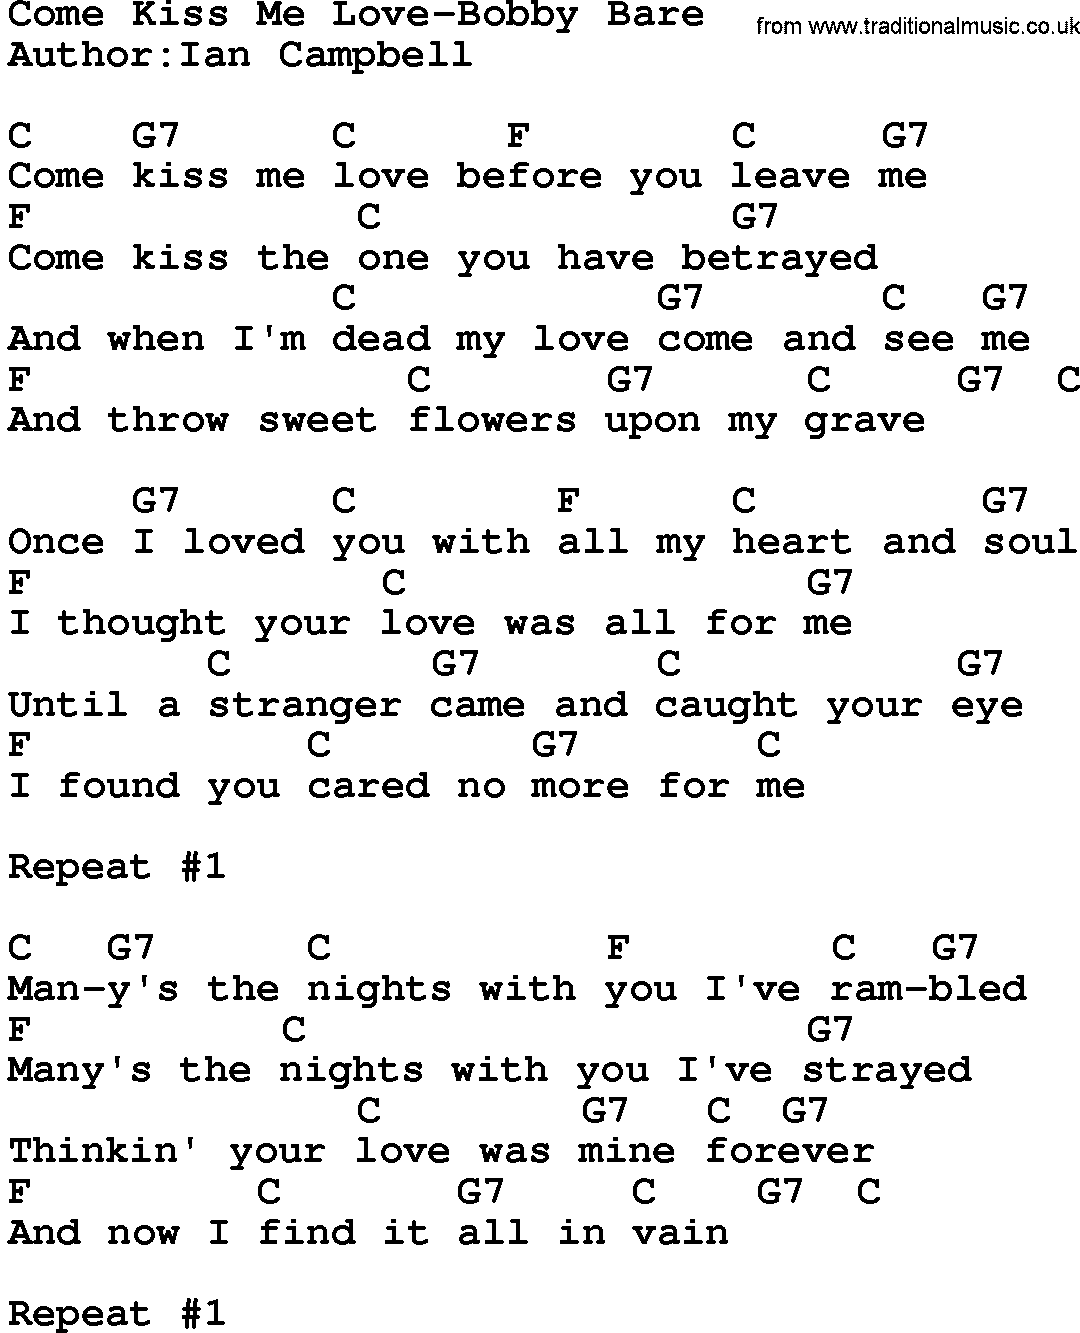 Country music song: Come Kiss Me Love-Bobby Bare lyrics and chords